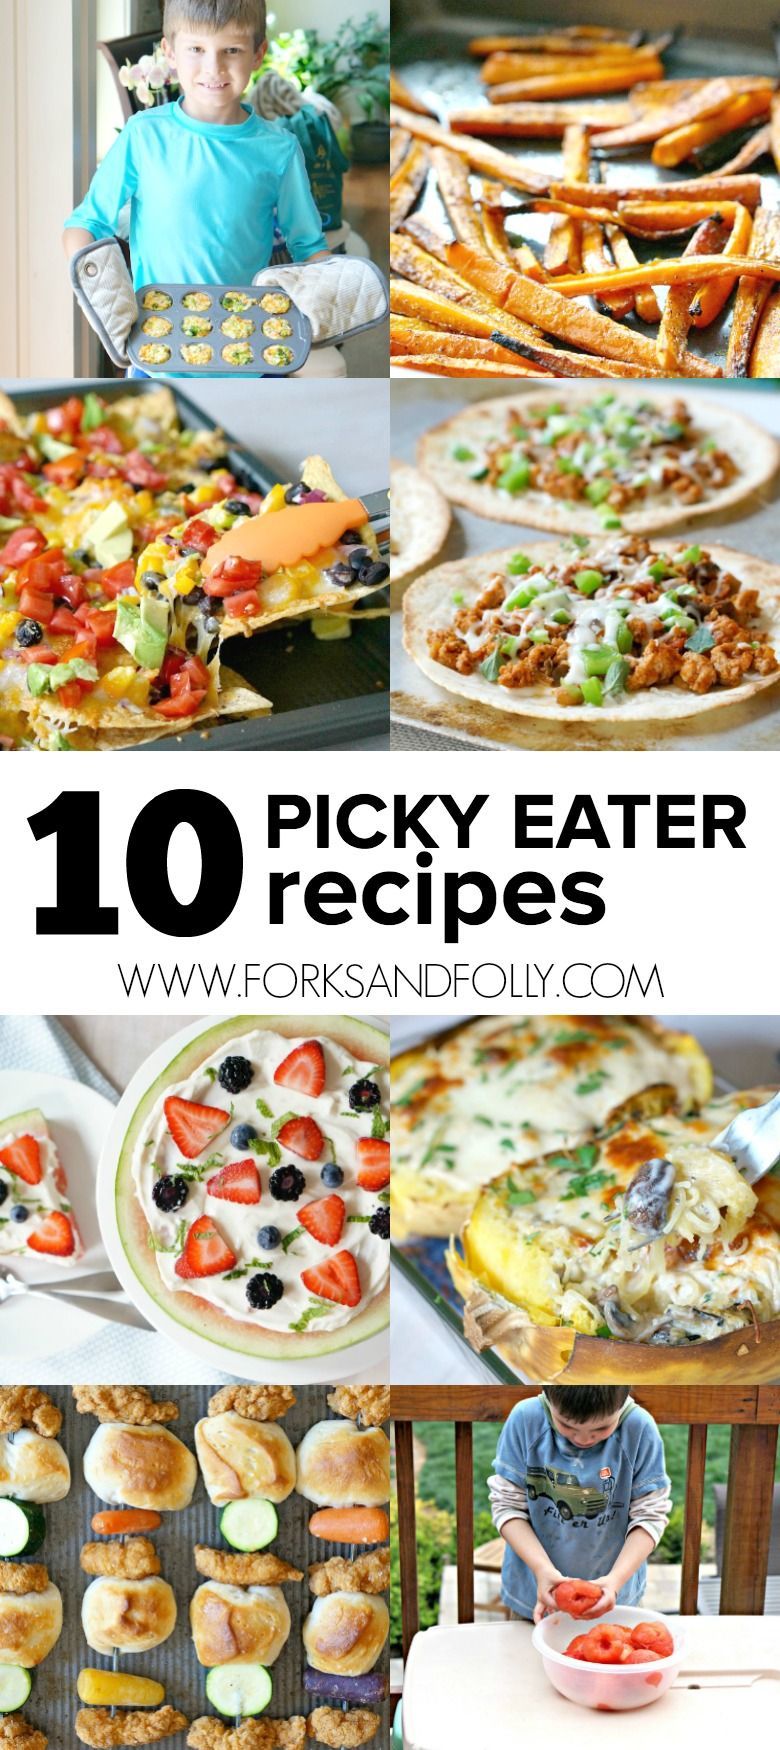 10 of the Best Picky Eater Recipes -   15 diet Food for picky eaters
 ideas